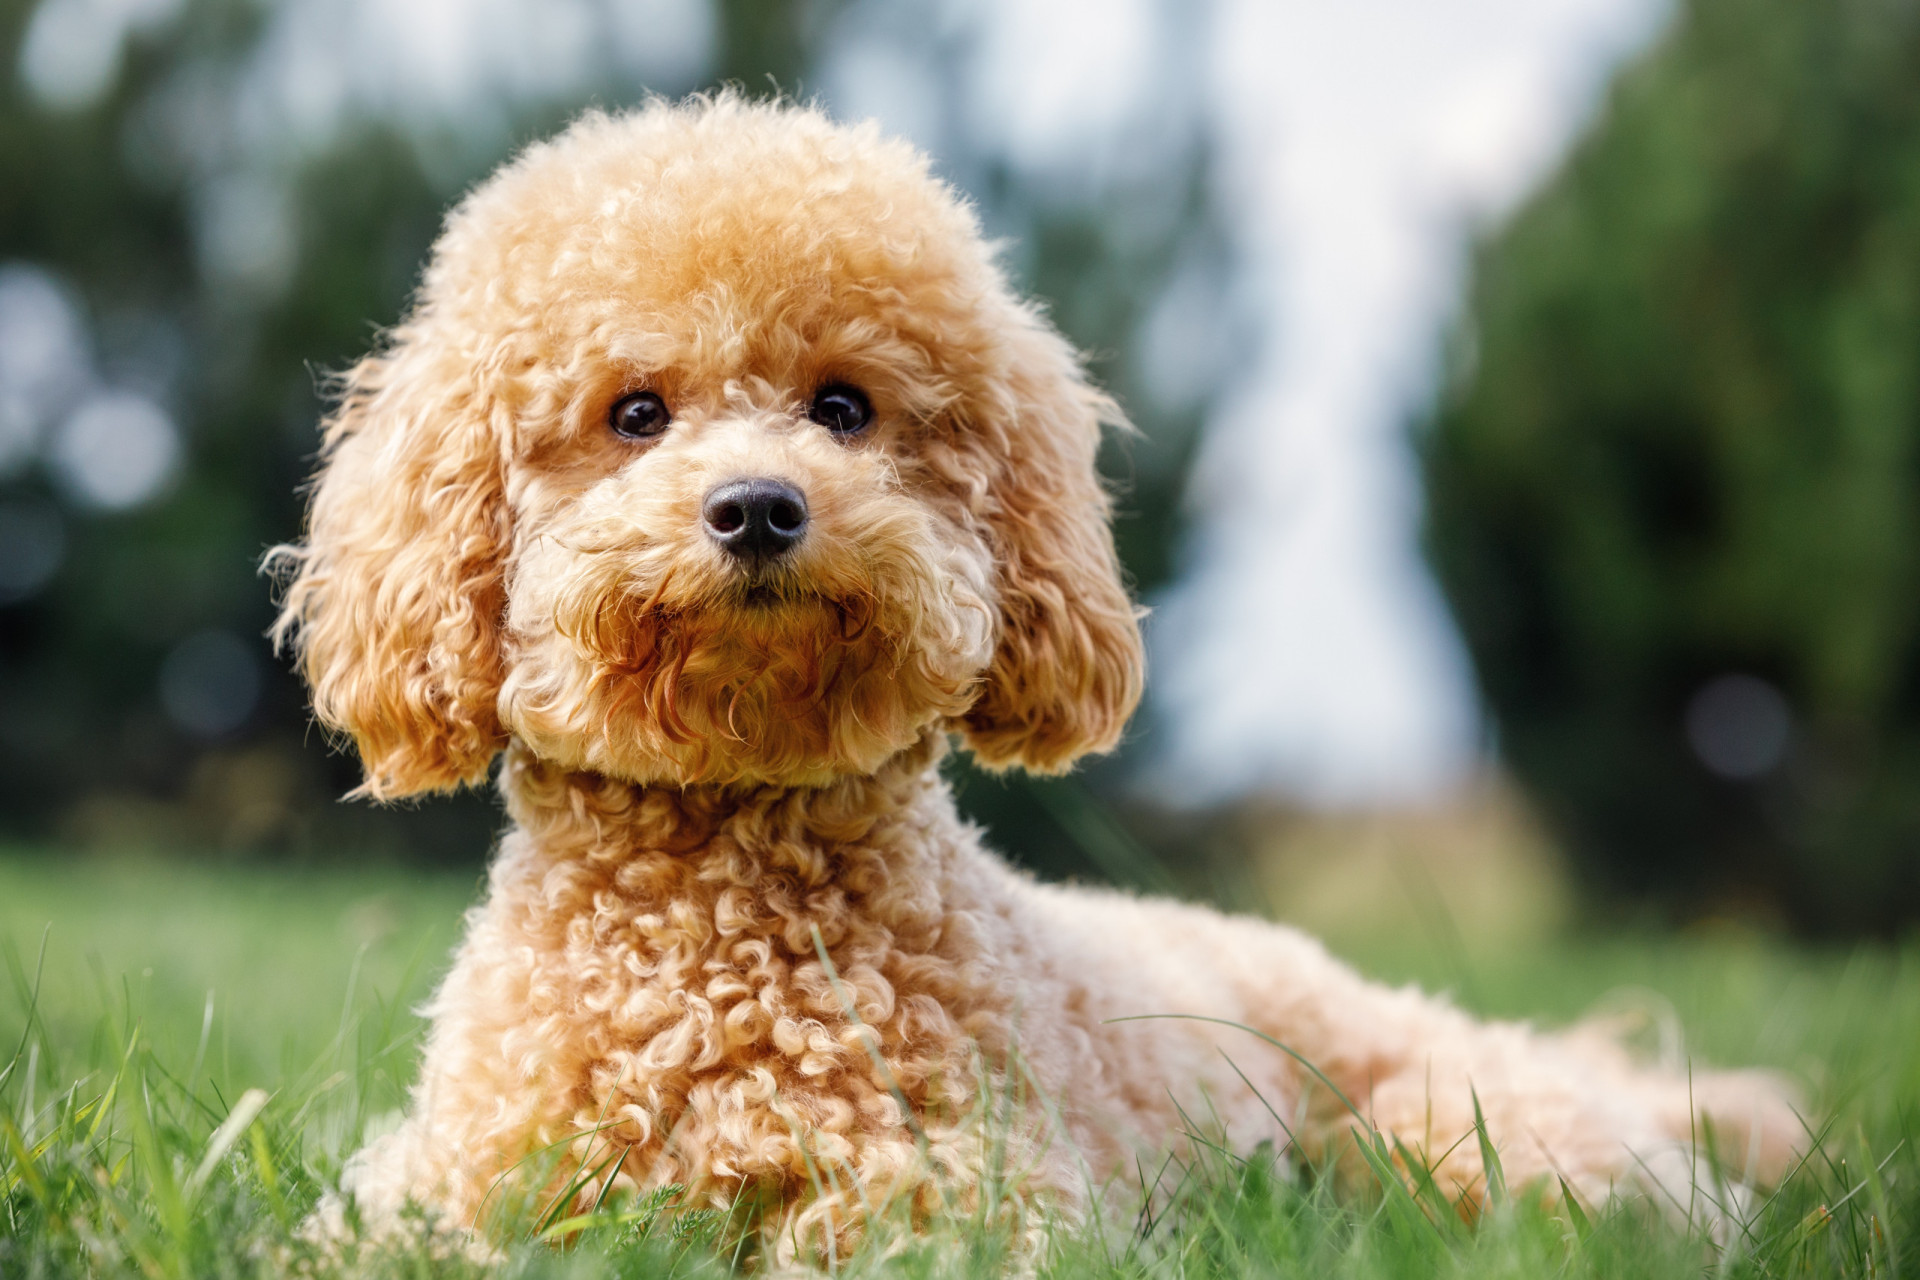 <p>Smaller than a standard-size Poodle, the Toy Poodle also requires plenty of physical exercise and mental stimulus. Their maximum life expectancy is 20 years, but they usually live to around 16. </p><p>You may also like:<a href="https://www.starsinsider.com/n/323218?utm_source=msn.com&utm_medium=display&utm_campaign=referral_description&utm_content=605595en-us"> The youngest and oldest Grammy winners, ever</a></p>